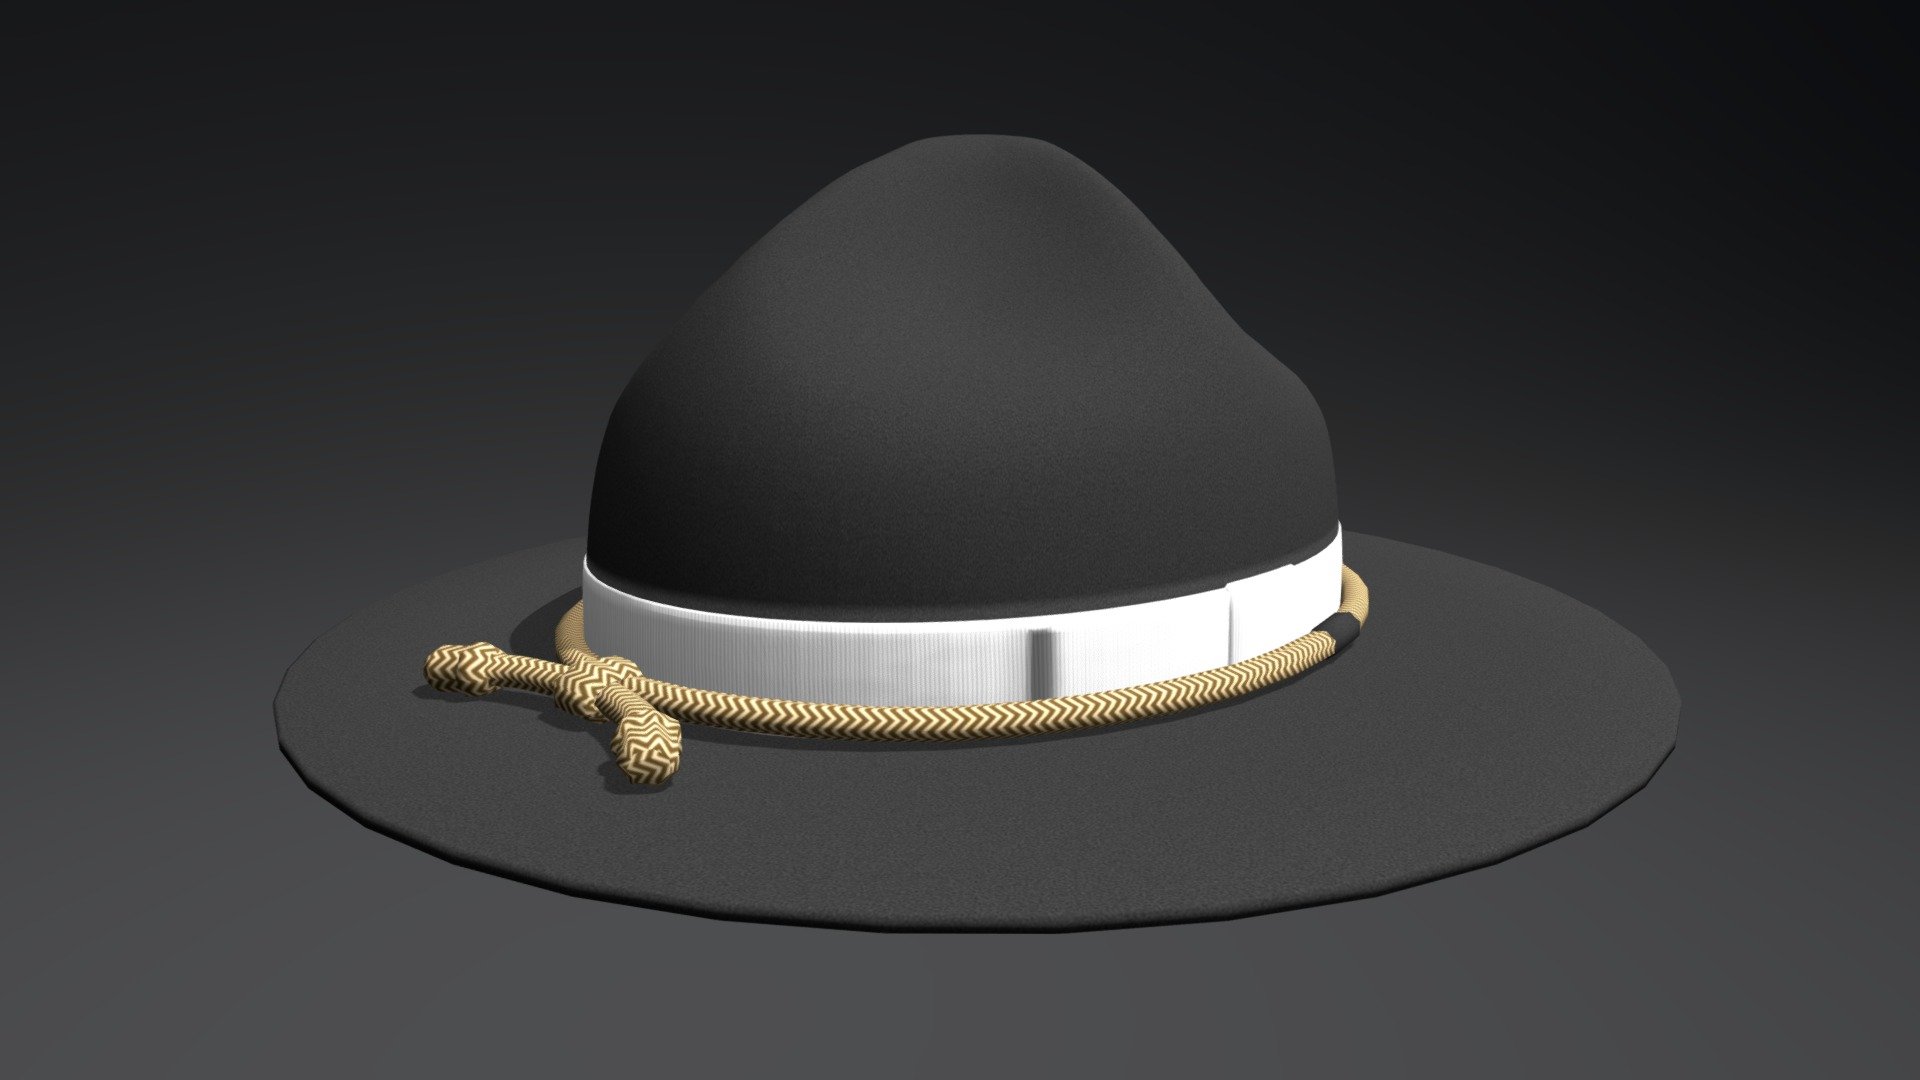 A campaign hat, sometimes called campaign cover, is a broad-brimmed felt or straw hat, with a high crown, pinched symmetrically at the four corners. The hat is most commonly worn as part of a uniform, by such organizations as the Royal Canadian Mounted Police, the New Zealand Army, United States Park Rangers, and Scouts. The campaign hat is occasionally referred to as a Stetson, derived from its origin in the company's Boss of the Plains model in the late 19th century. It should not be confused with the Stetson style cowboy hat, which has a different brim and crease, nor a slouch hat.

*1 model (medium poly) with textures and materials 3d model